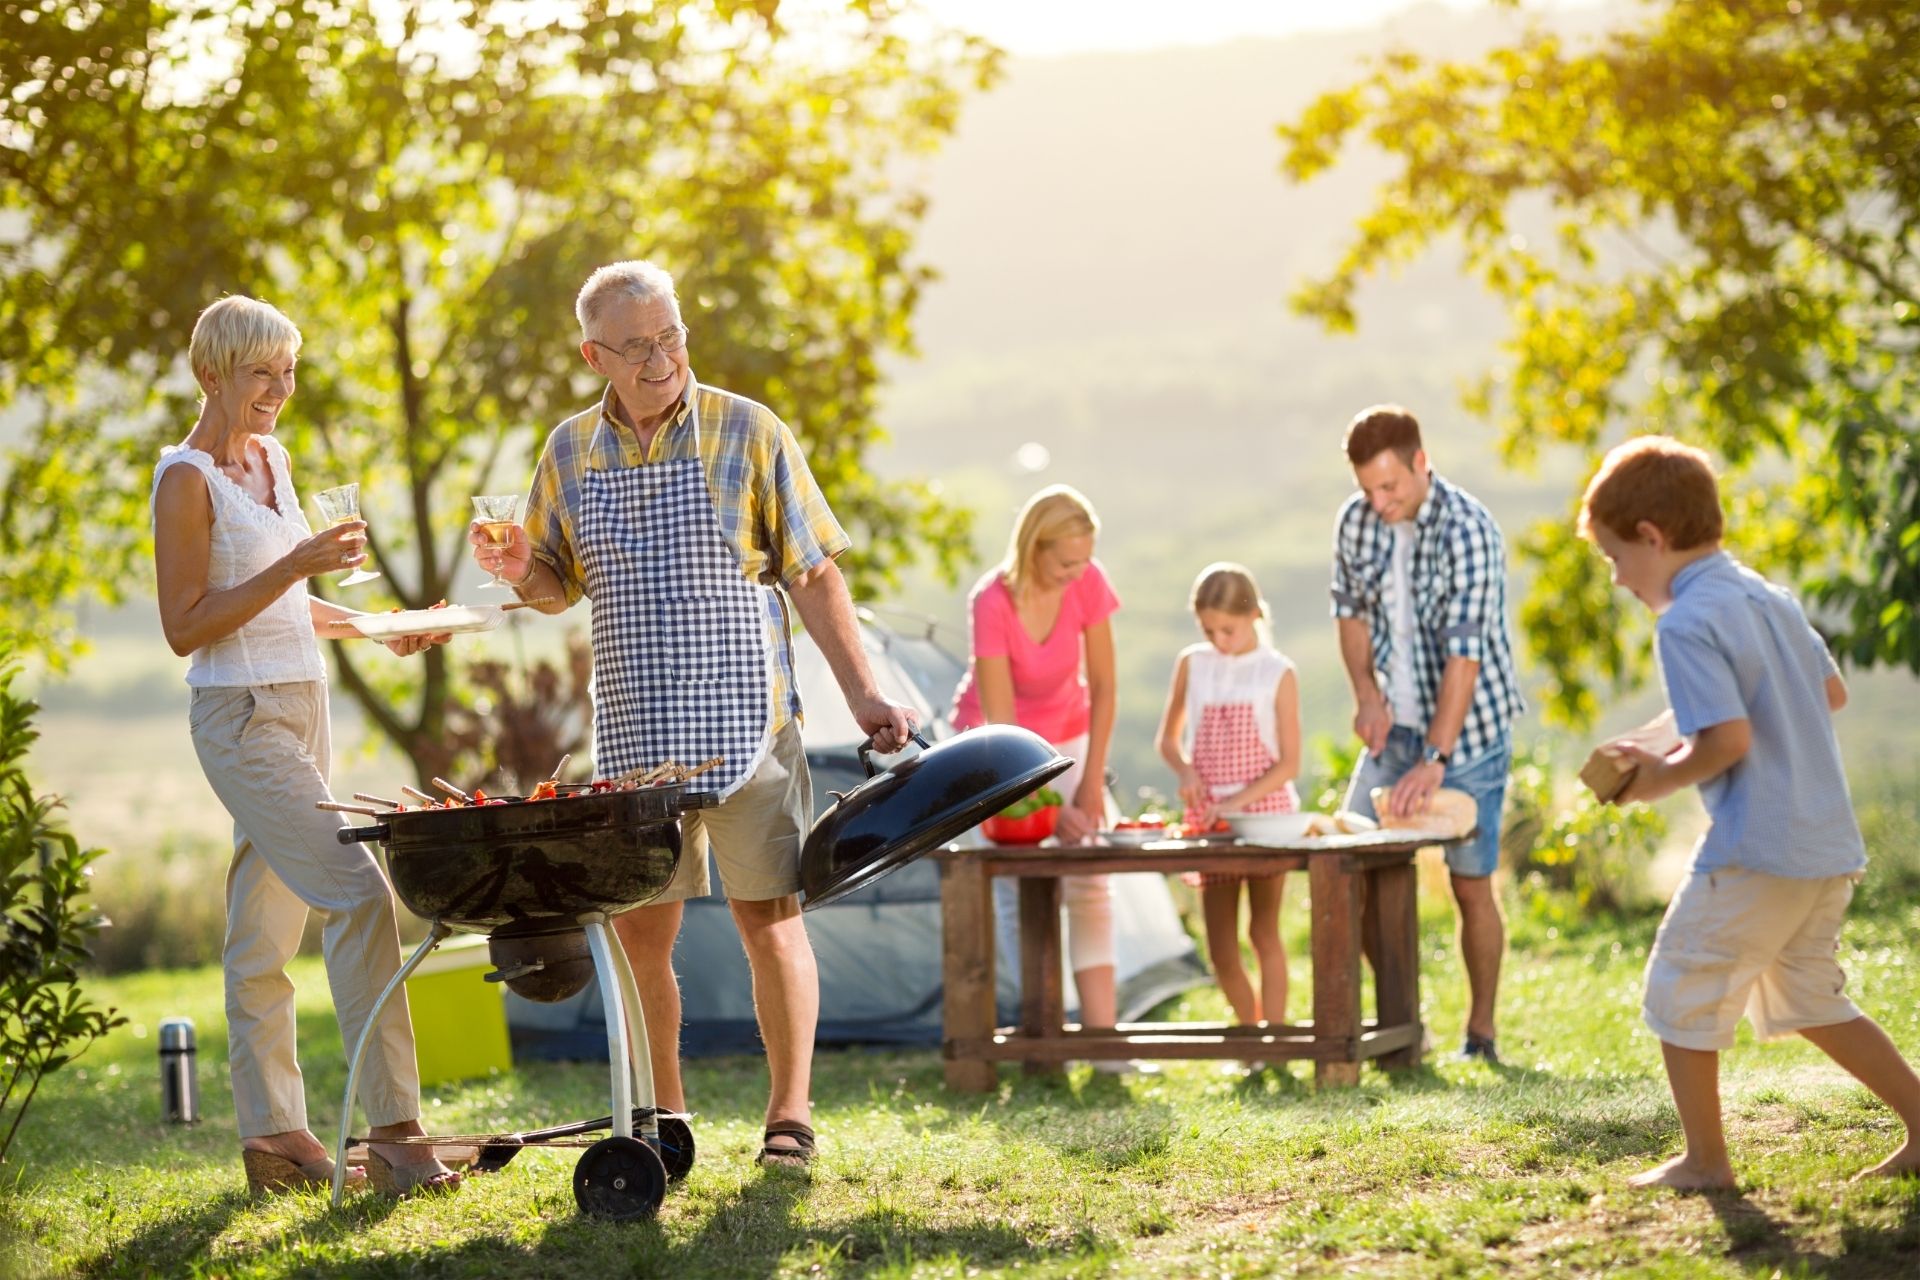 Image of family barbecuing outdoors